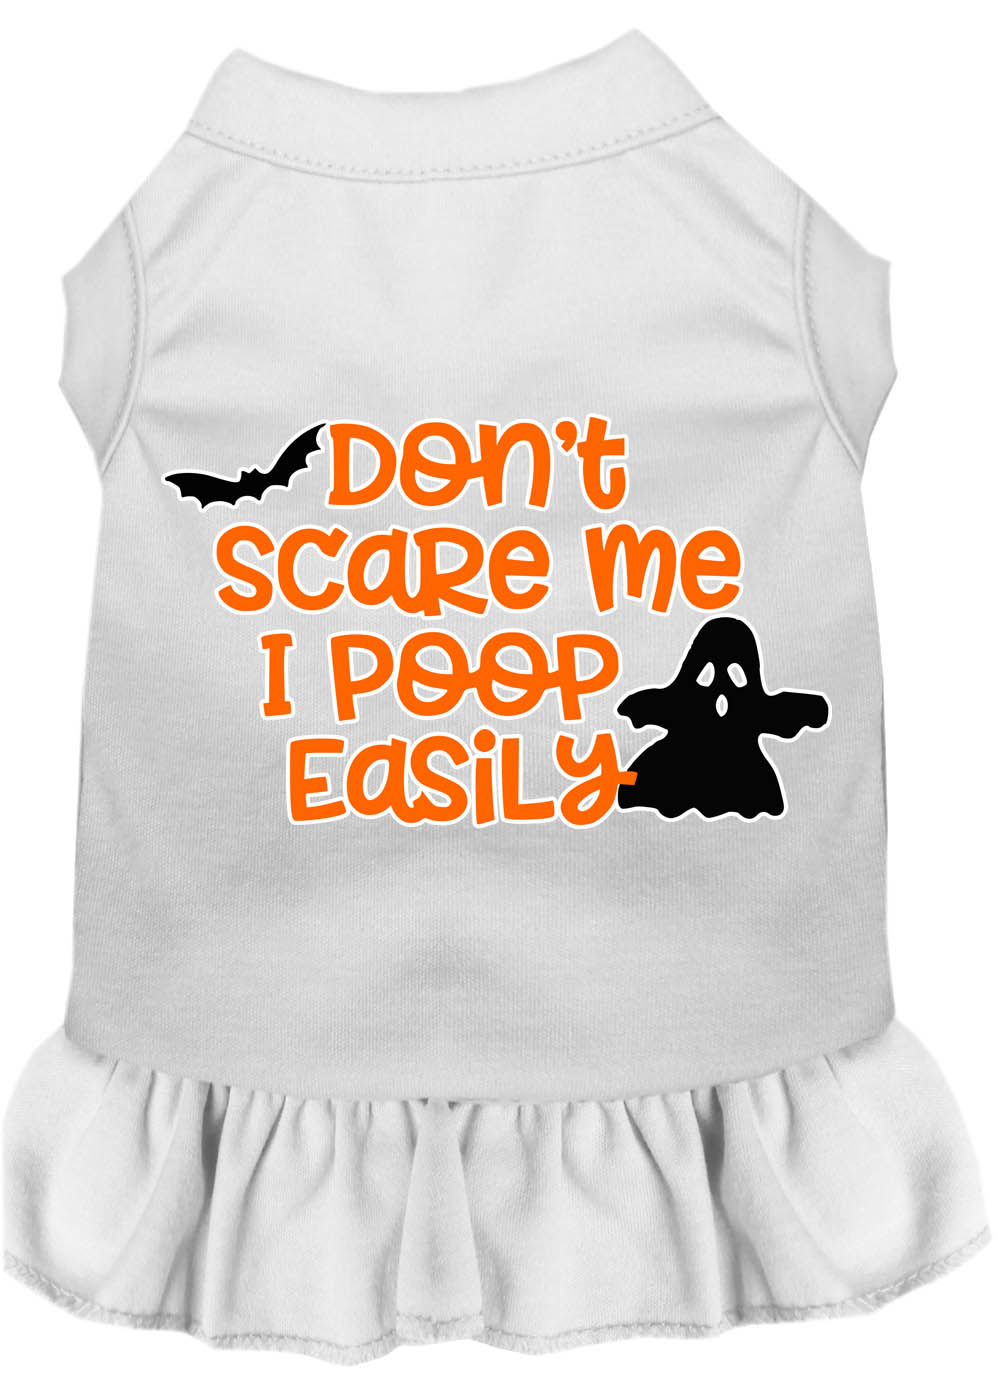 Don't Scare Me, Poops Easily Screen Print Dog Dress White XS